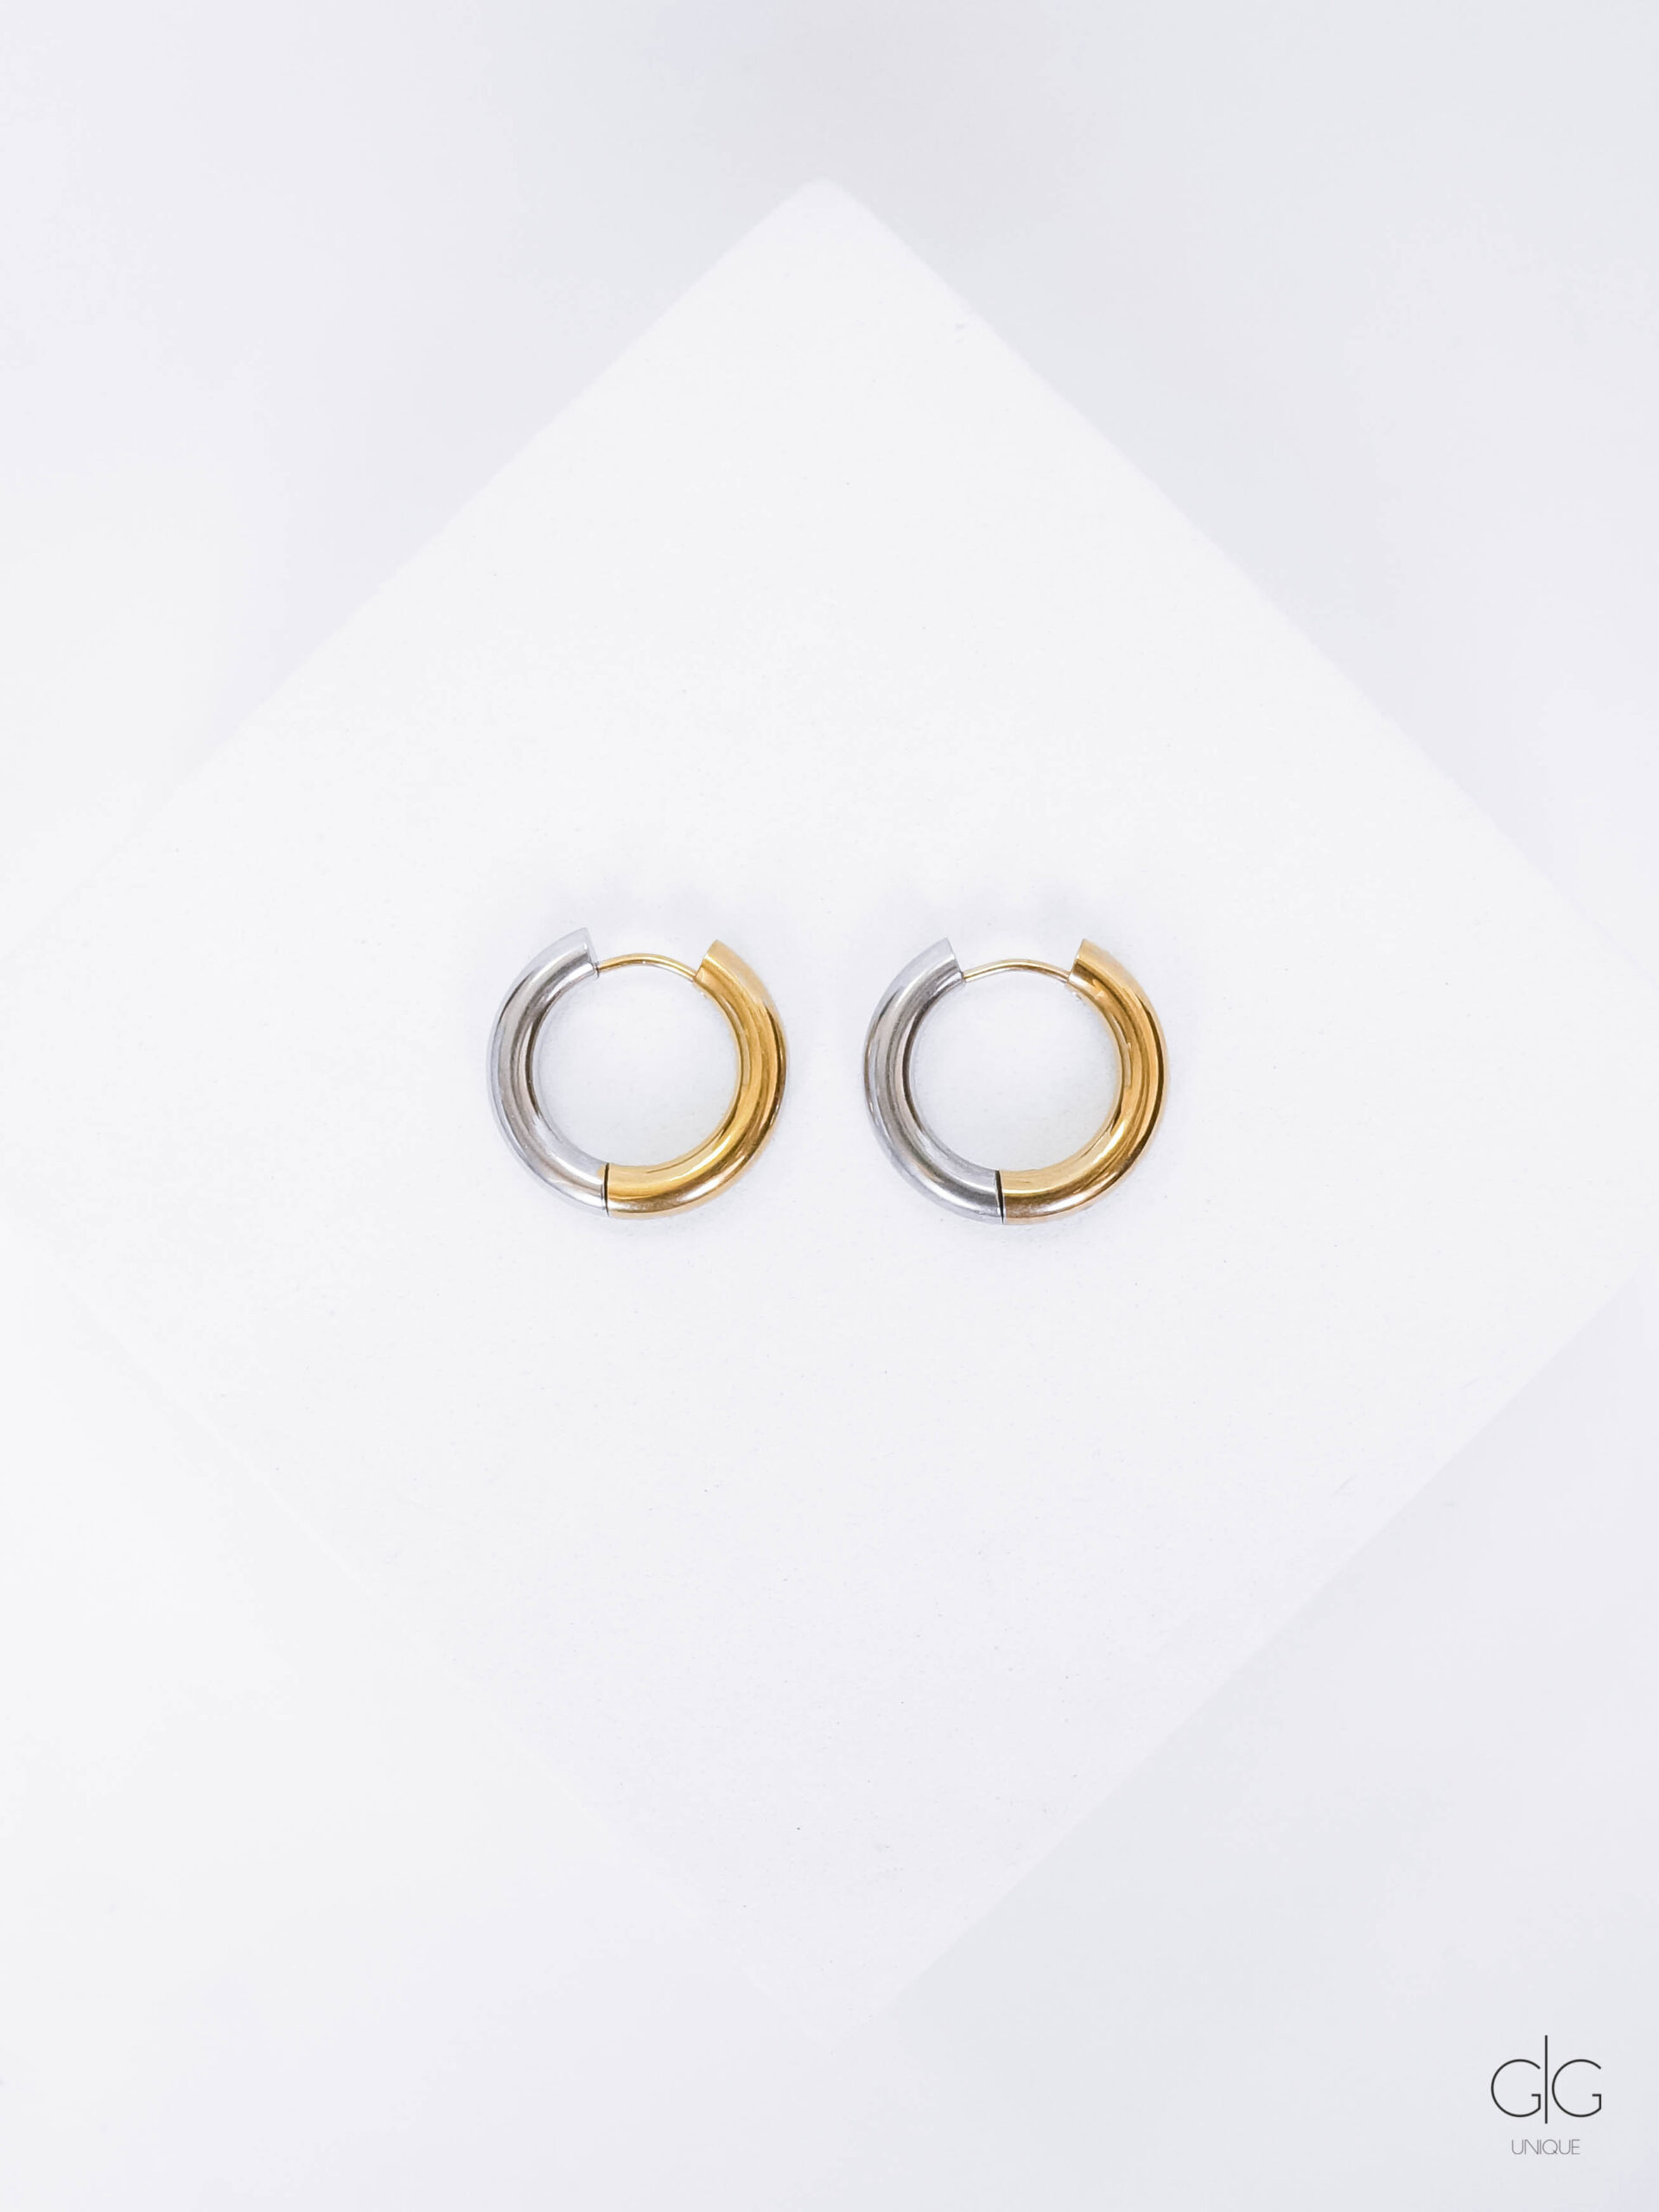 Gold and silver hoop earrings - GG UNIQUE